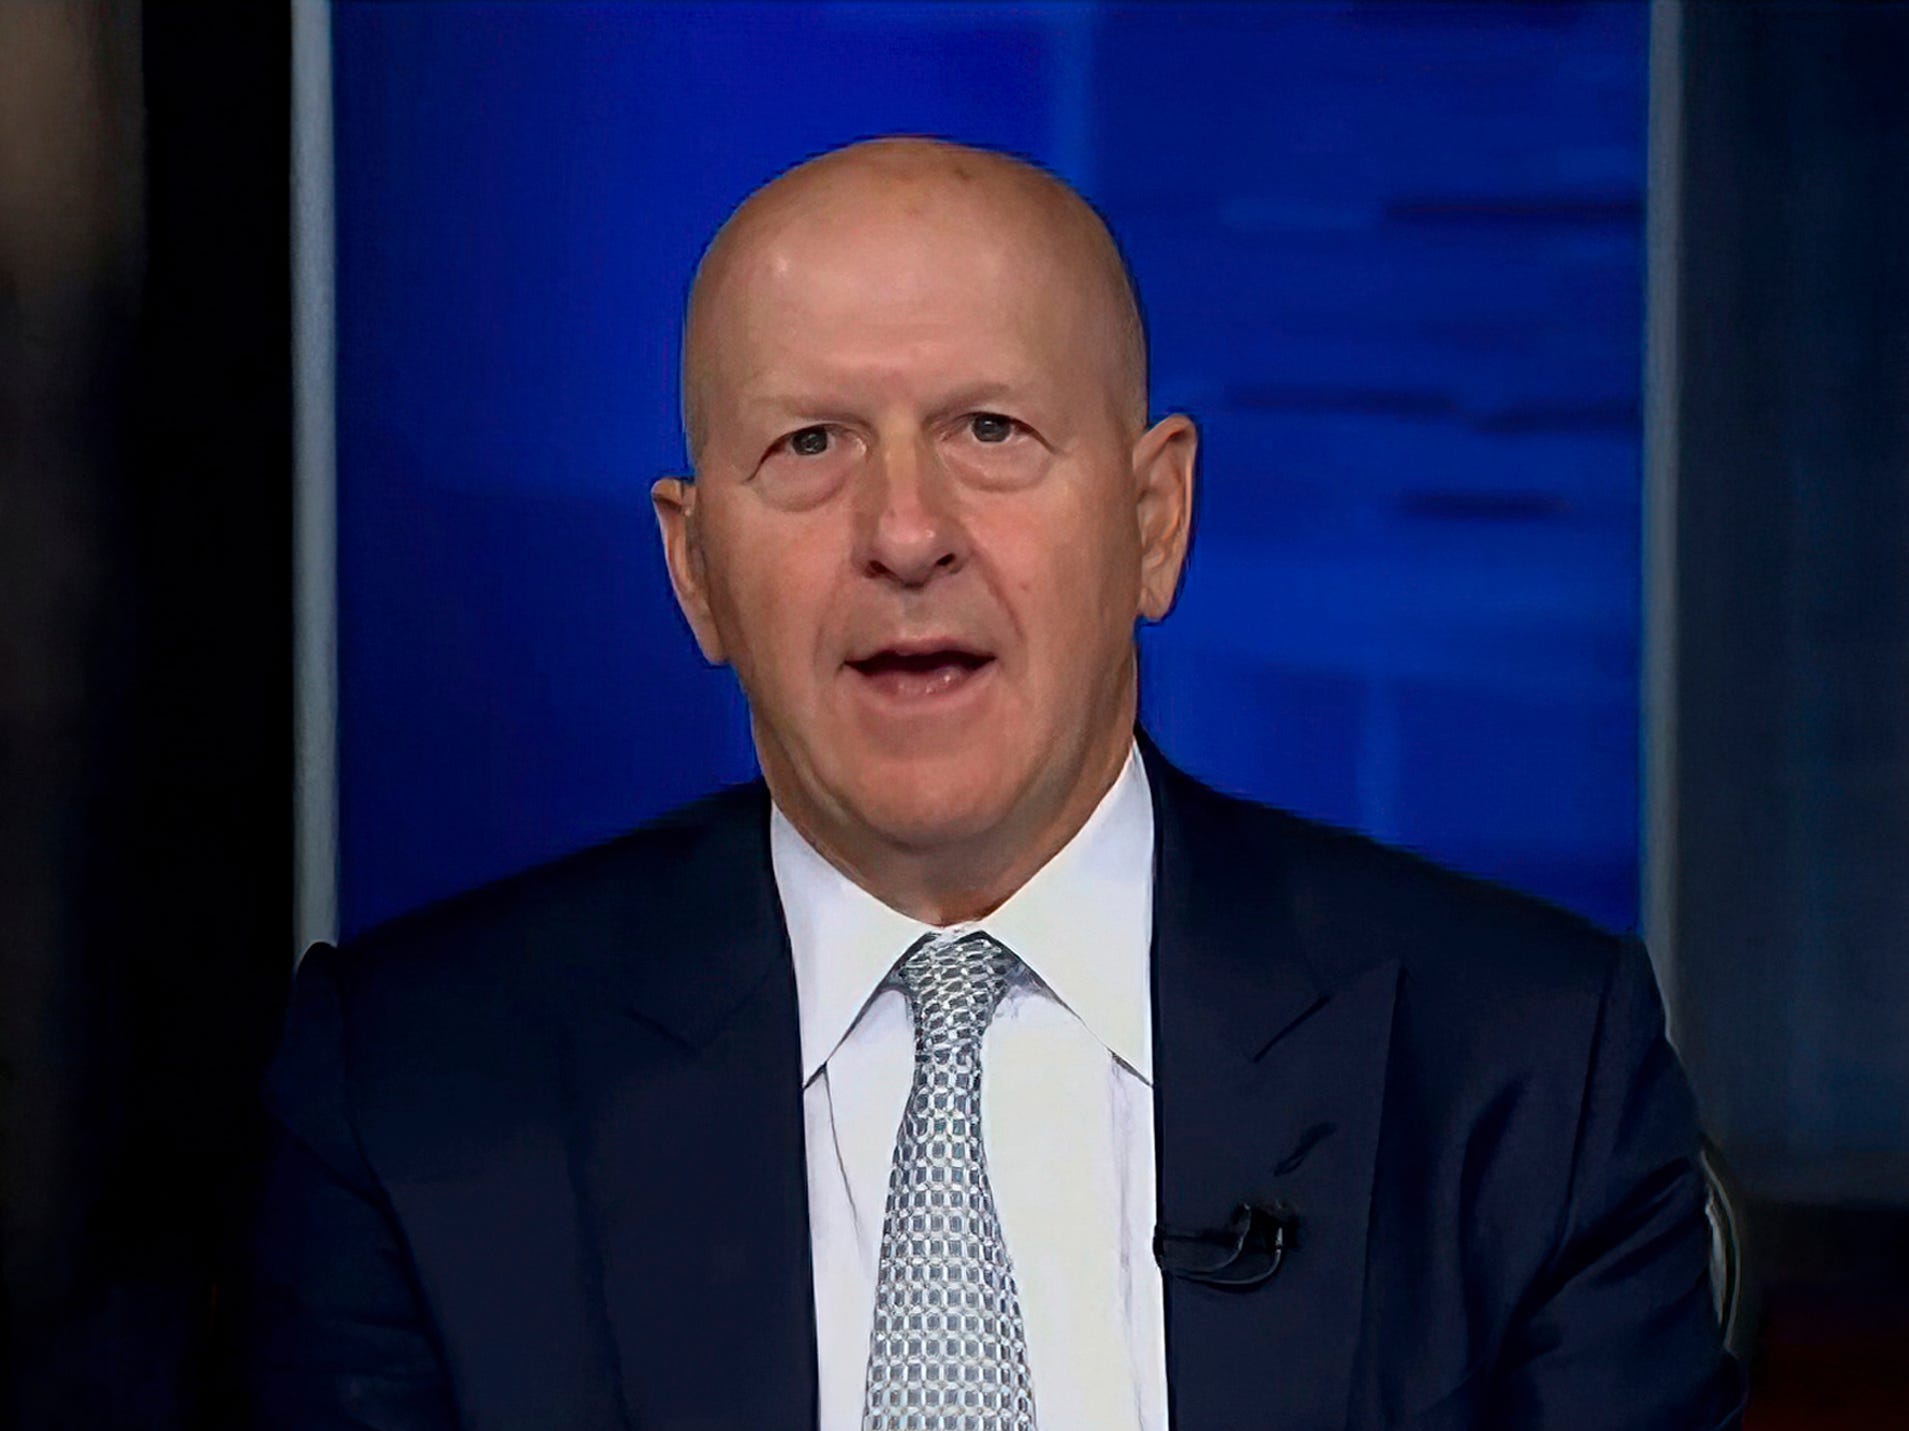 Goldman Sachs chief David Solomon speaks in front of a blue screen.